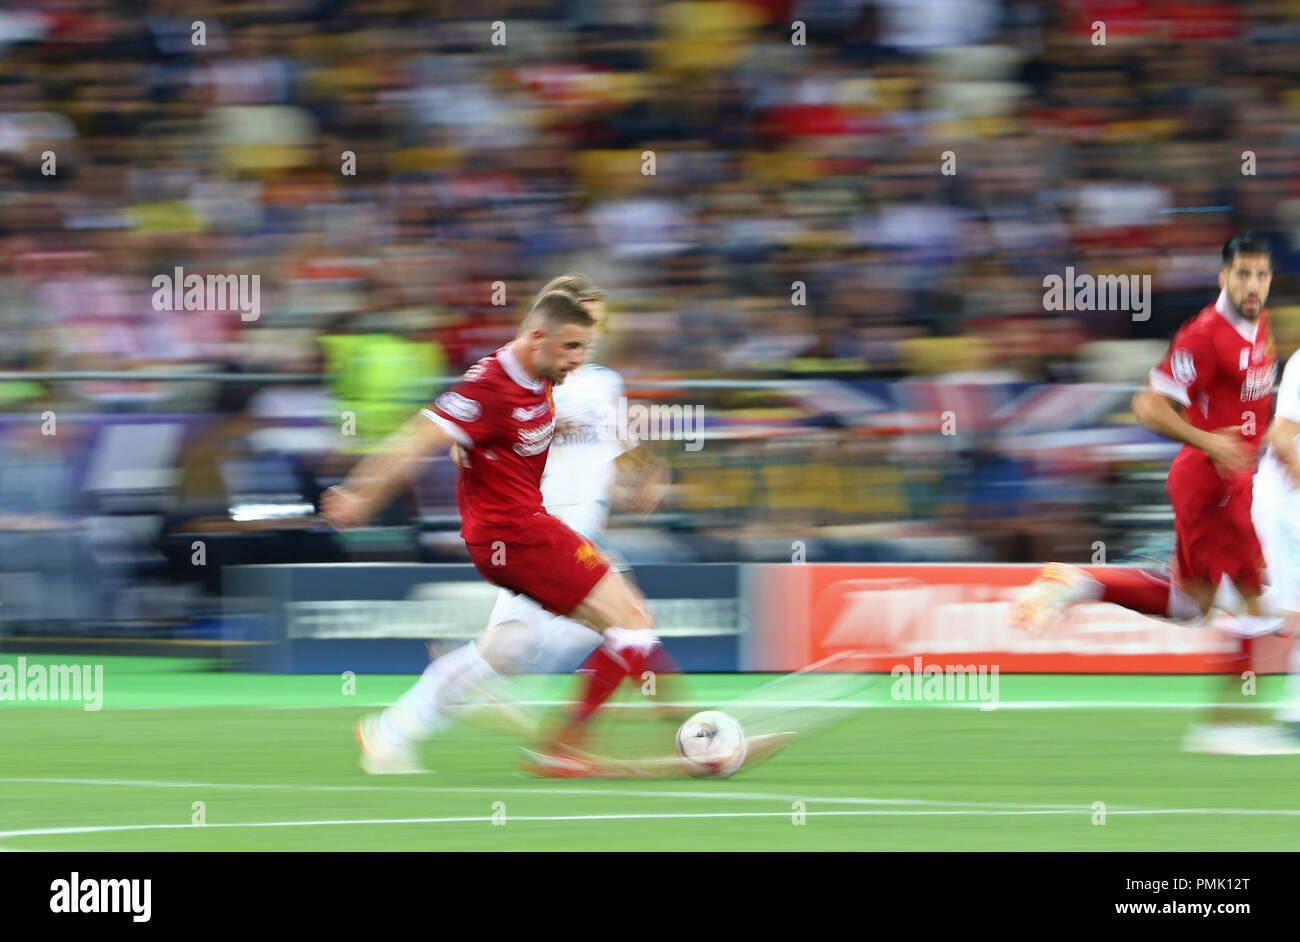 KYIV, UKRAINE - MAY 26, 2018: Jordan Henderson of Liverpool in action during the UEFA Champions League Final 2018 game against Real Madrid at NSC Olim Stock Photo